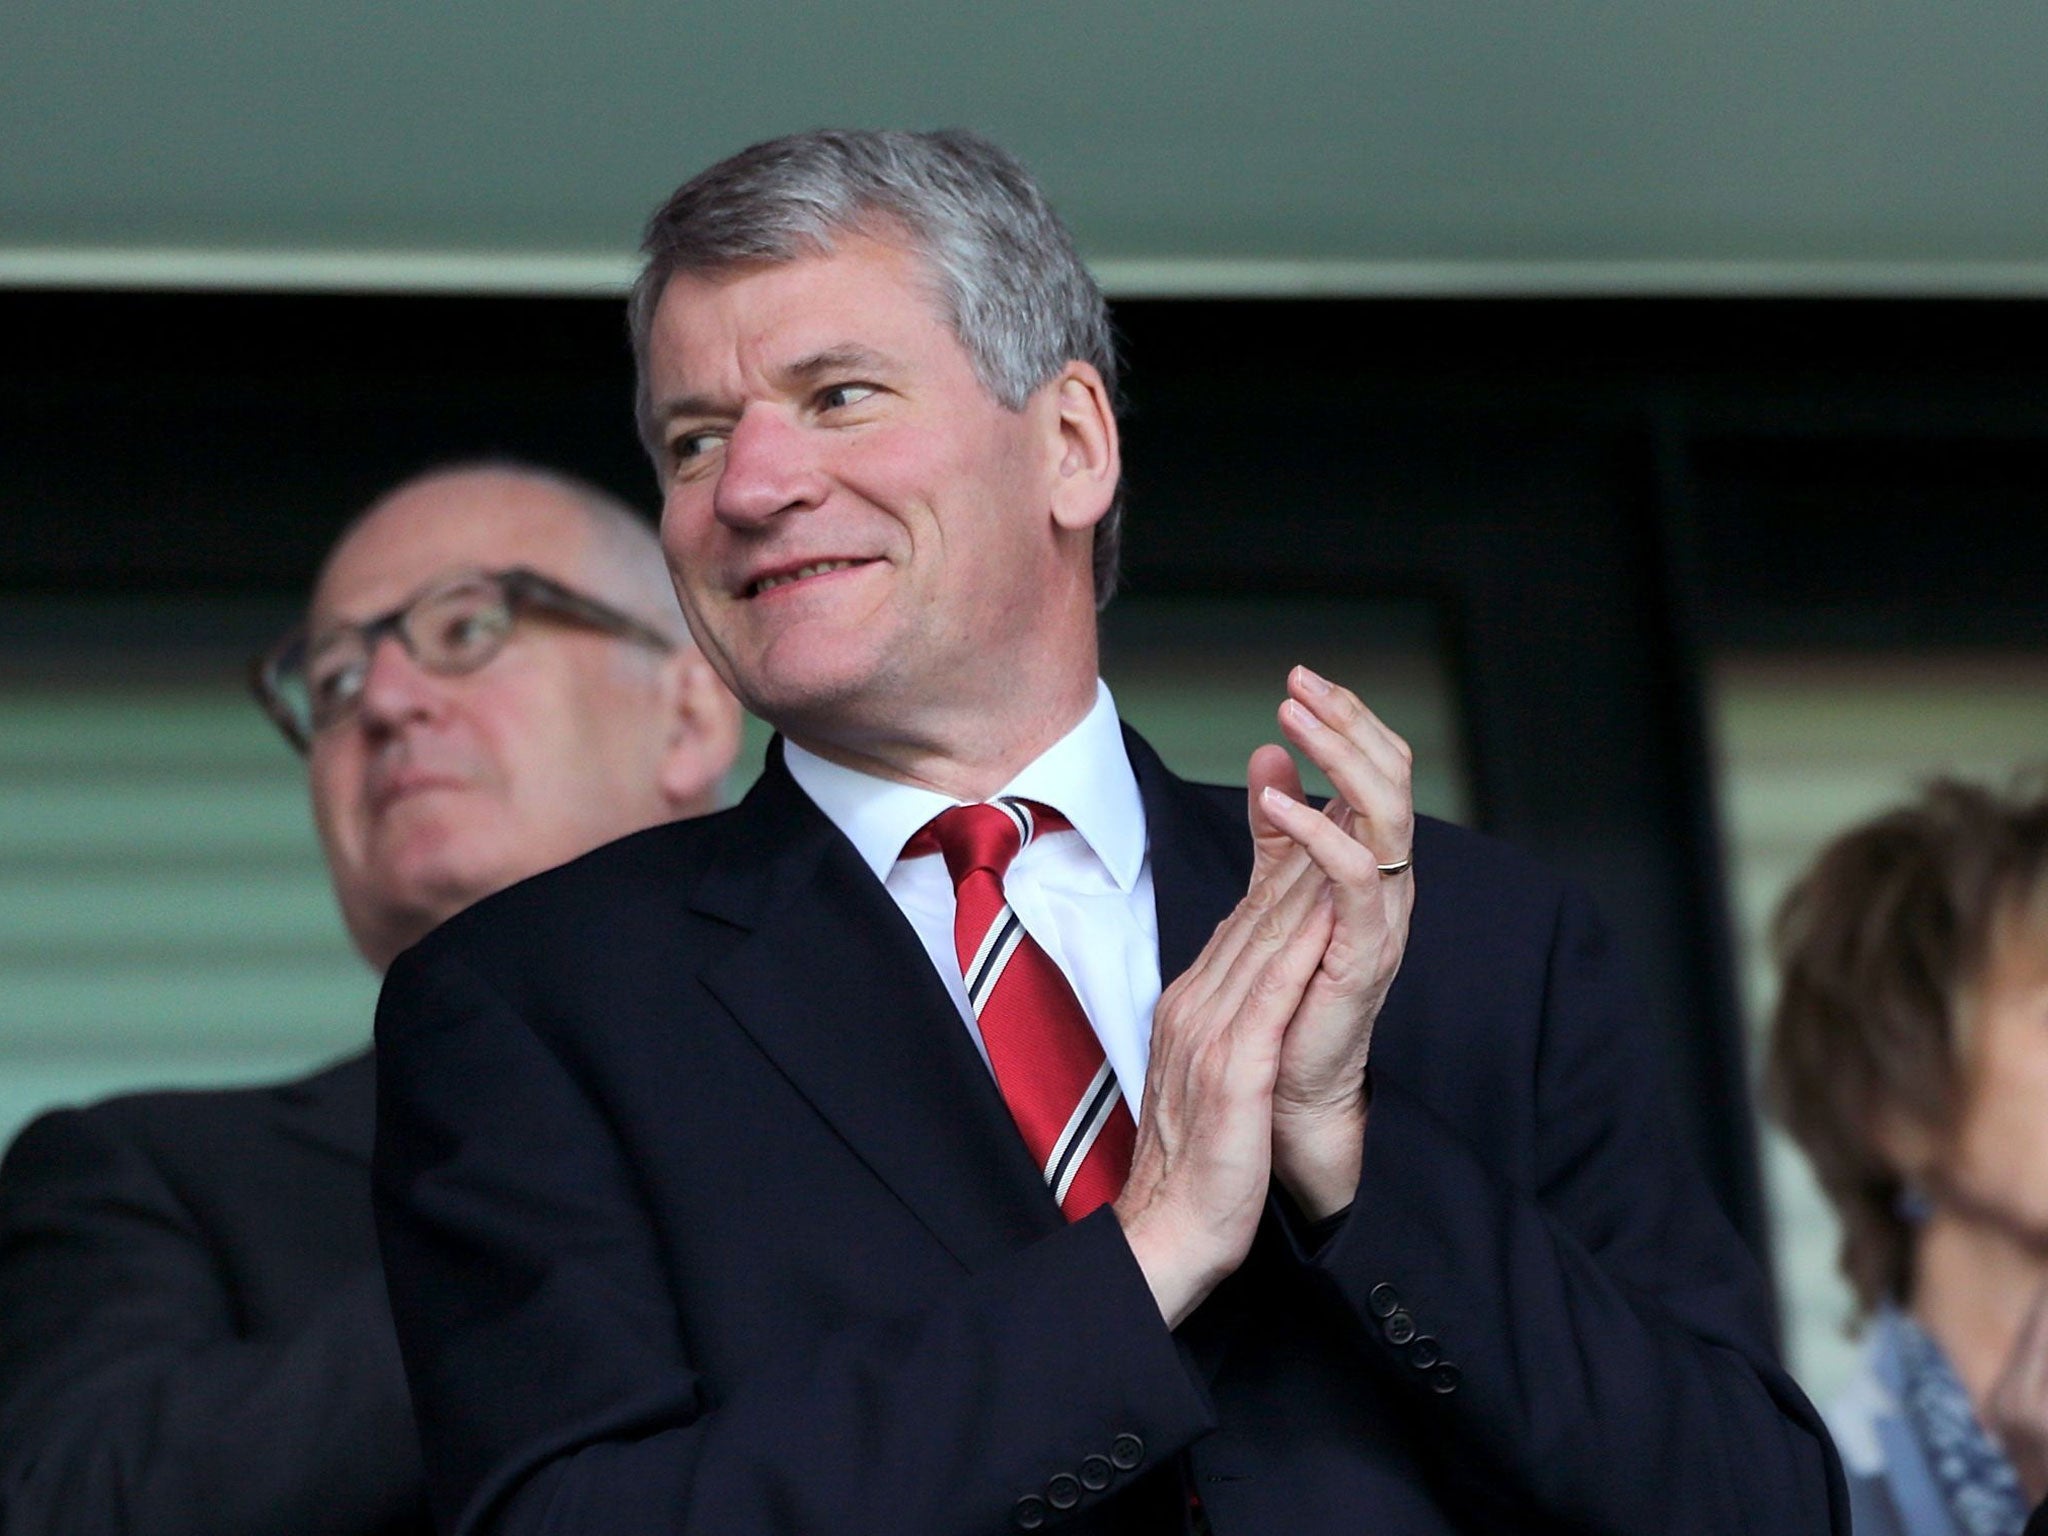 David Gill expects the Champions League final at Wembley to be the perfect showcase for the bid to host the Euro 2020 semi-finals and final